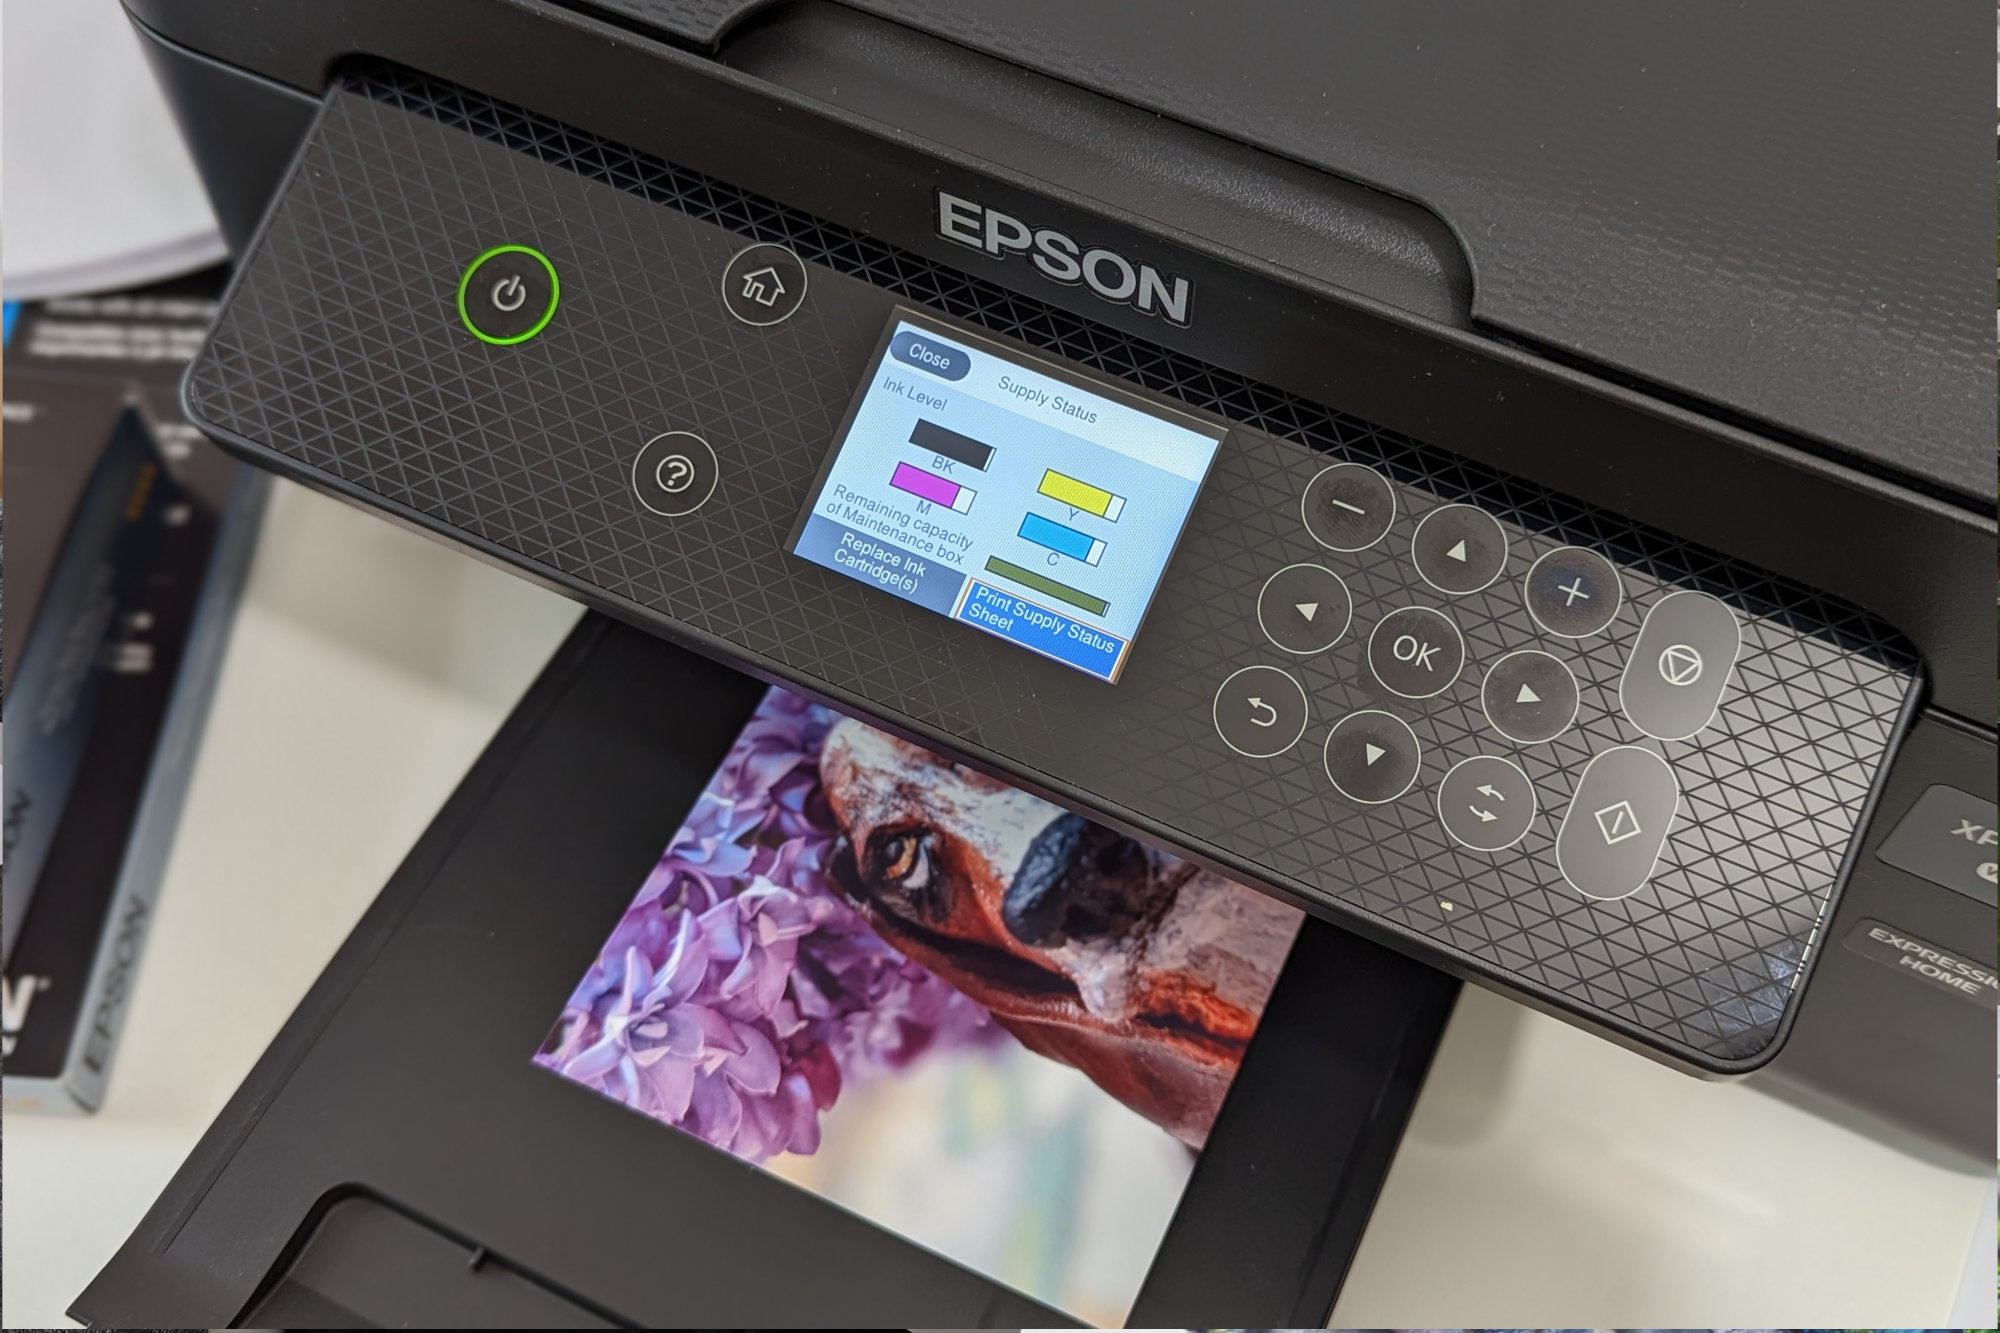 A 4x6 print is in progress on the Epson Expression Home XP-4200 with ink levels on the display.